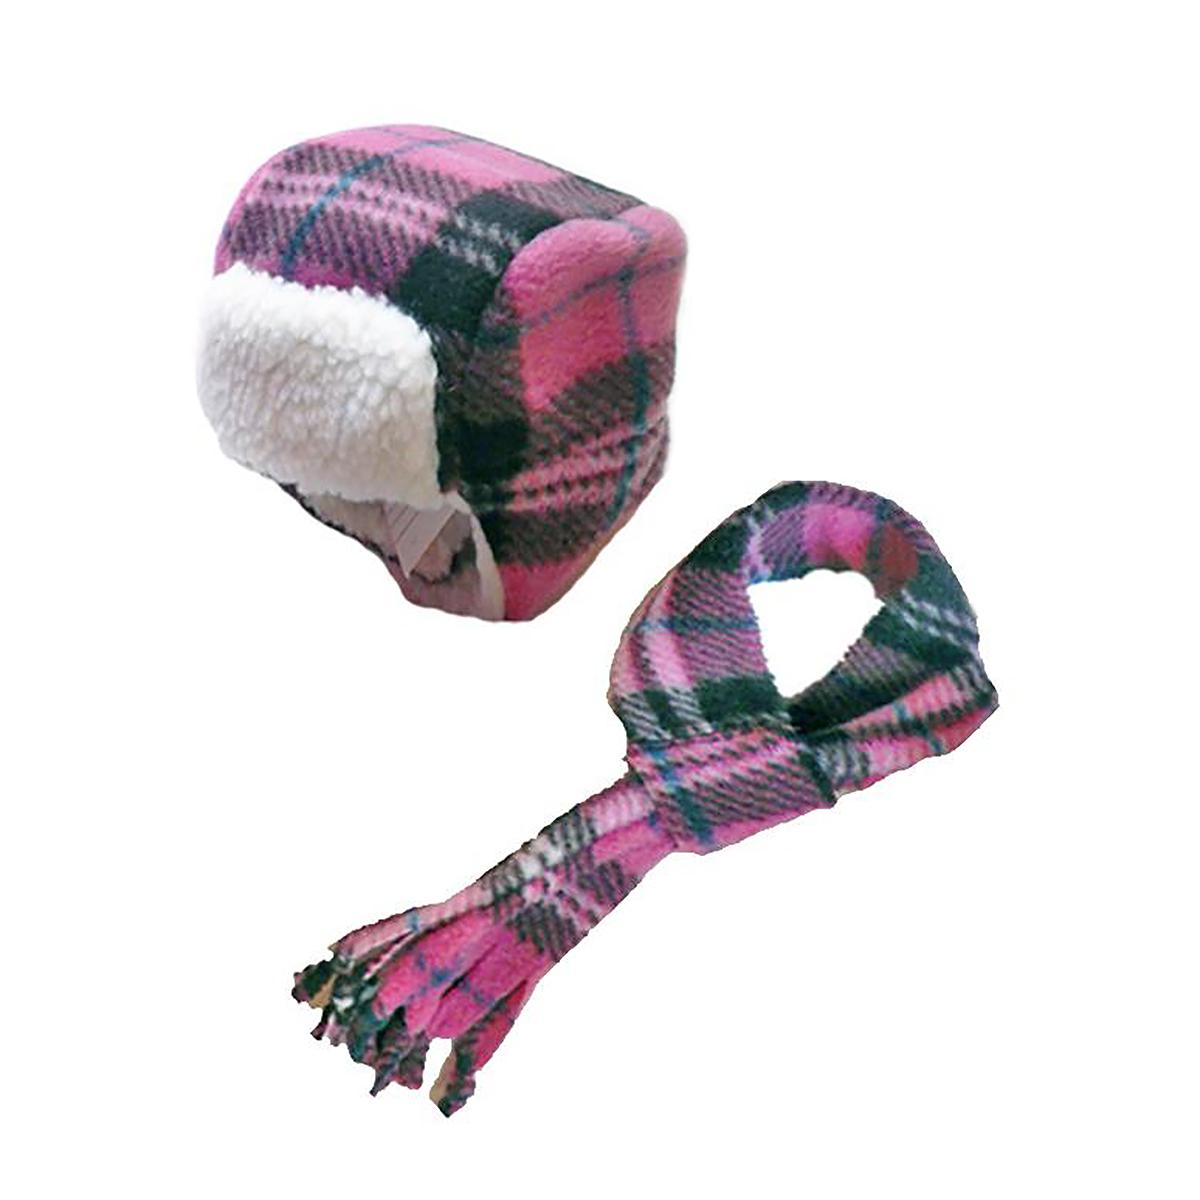 My Canine Kids Aviator Hat and Scarf Set for Dogs - Pink Plaid